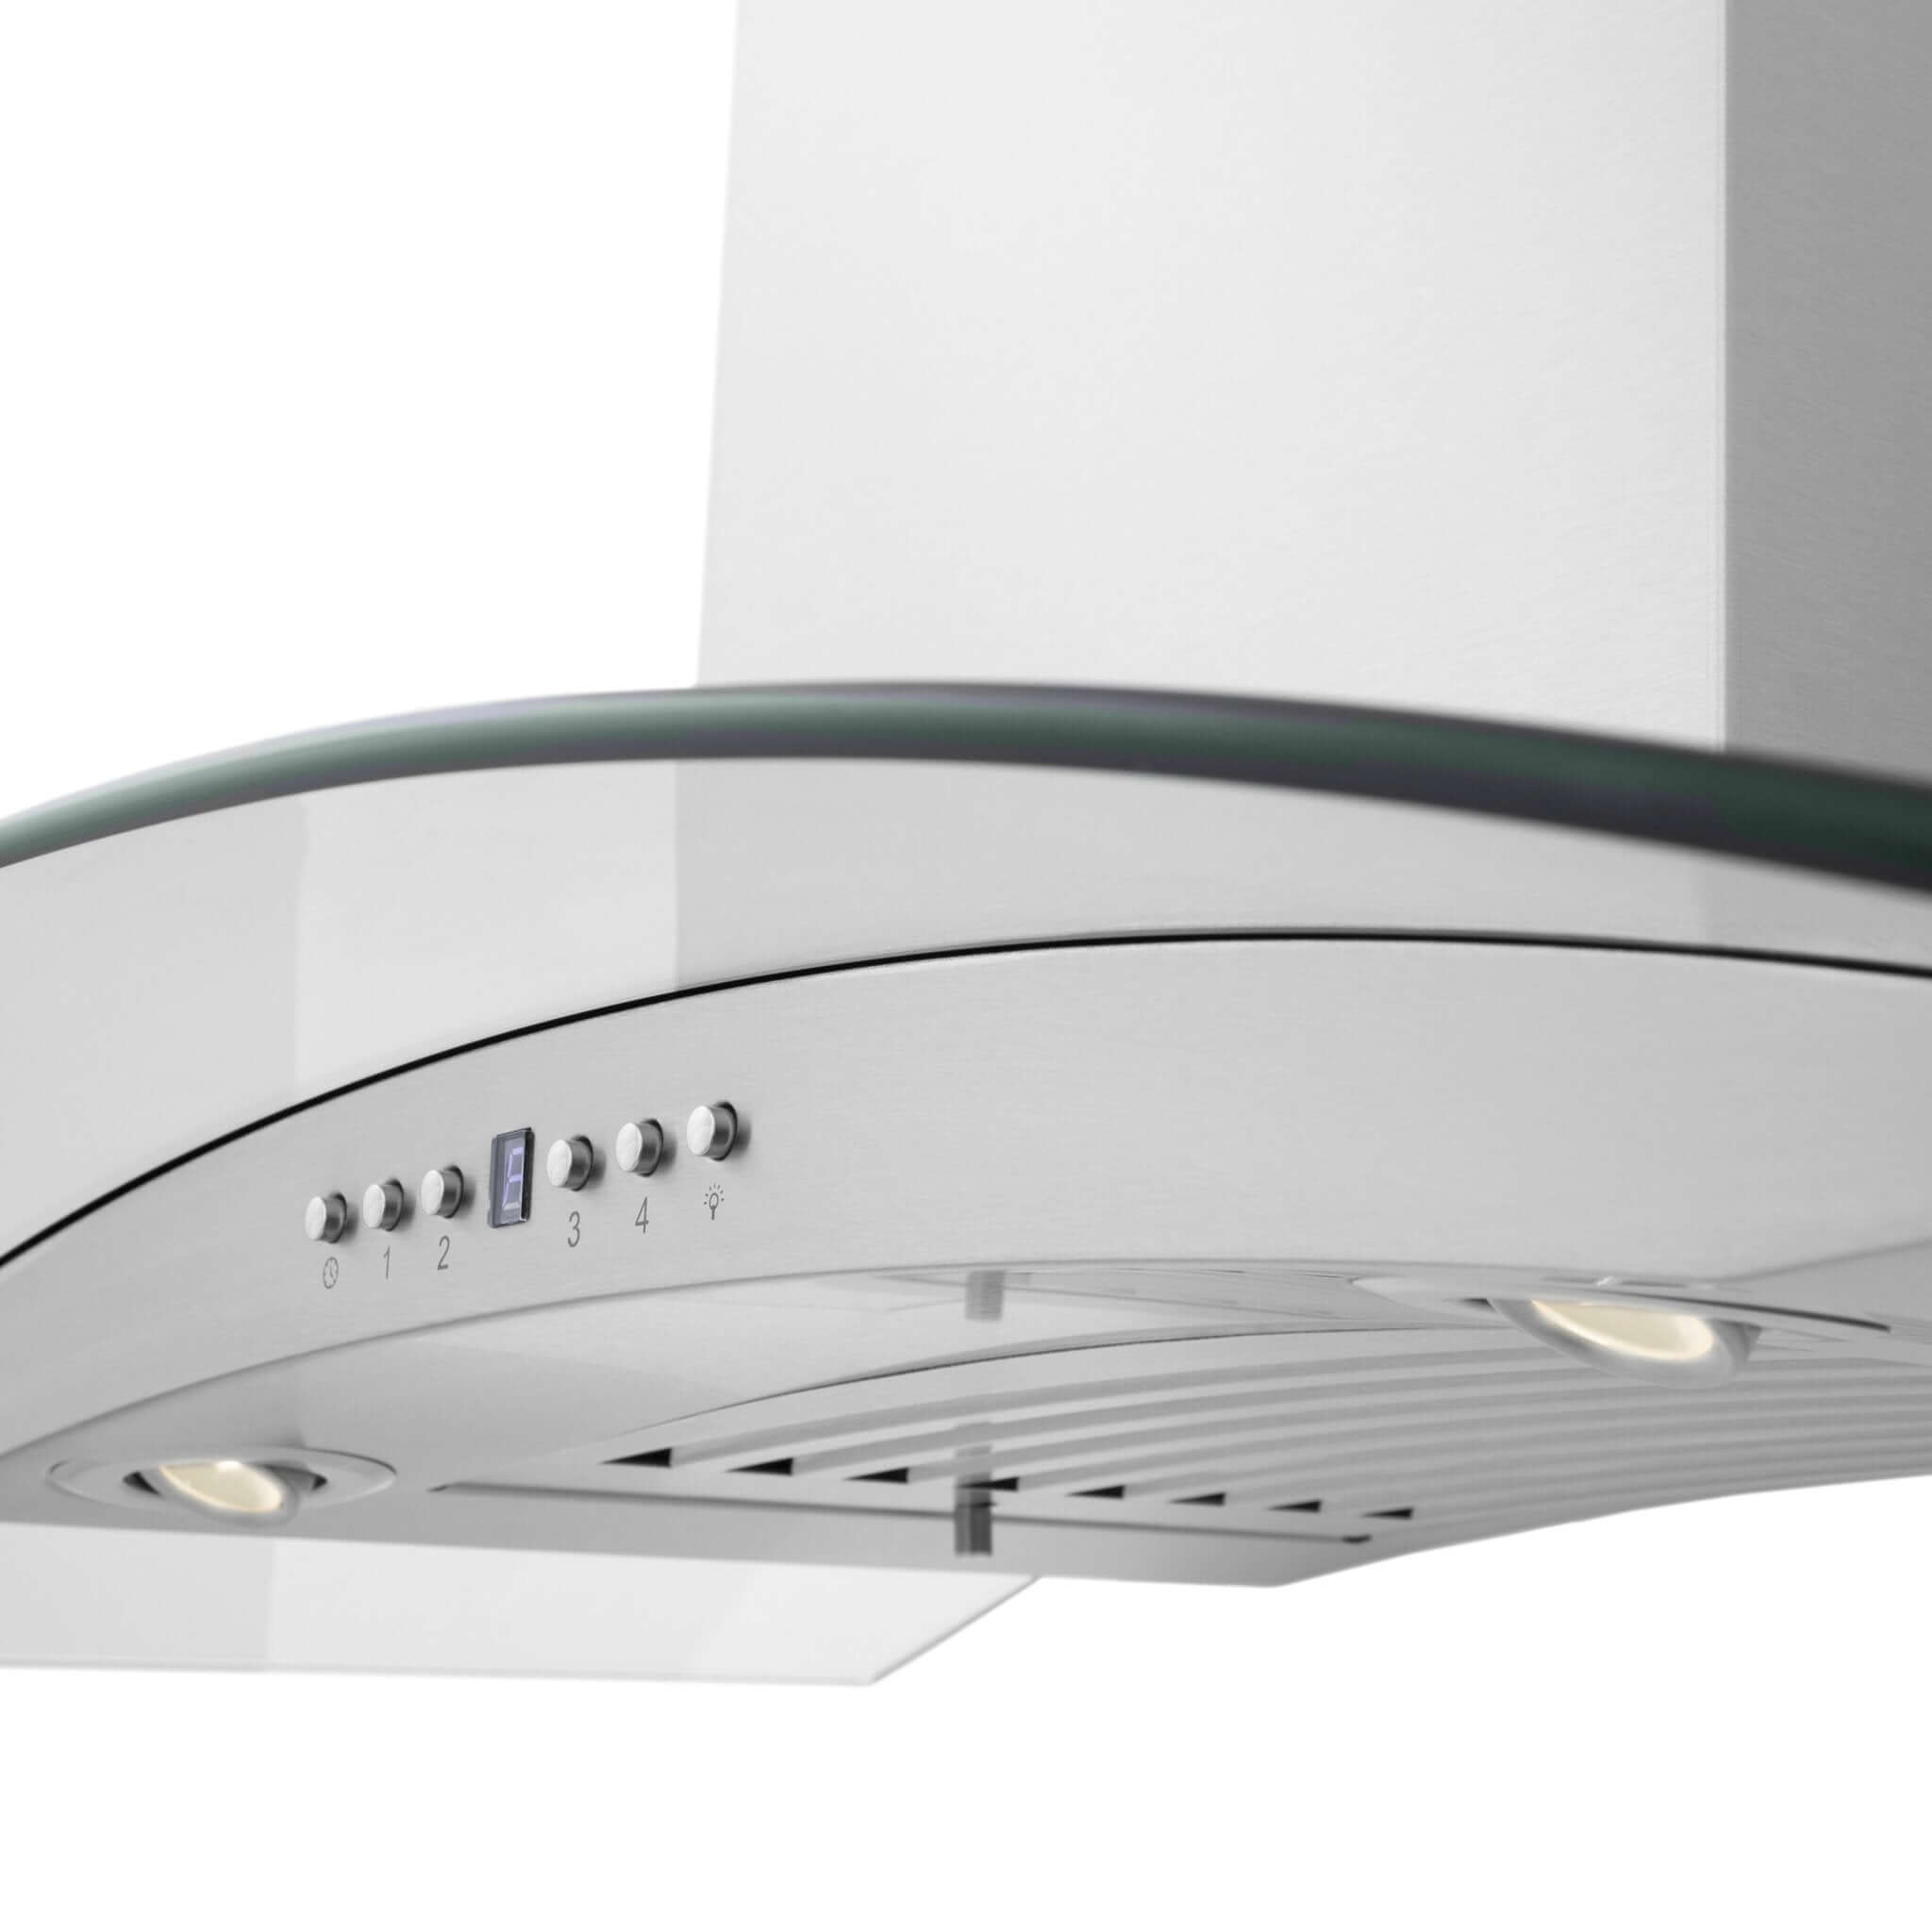 ZLINE 48" Convertible Vent Convertible Vent Wall Mount Range Hood in Stainless Steel & Glass (KN4-48)